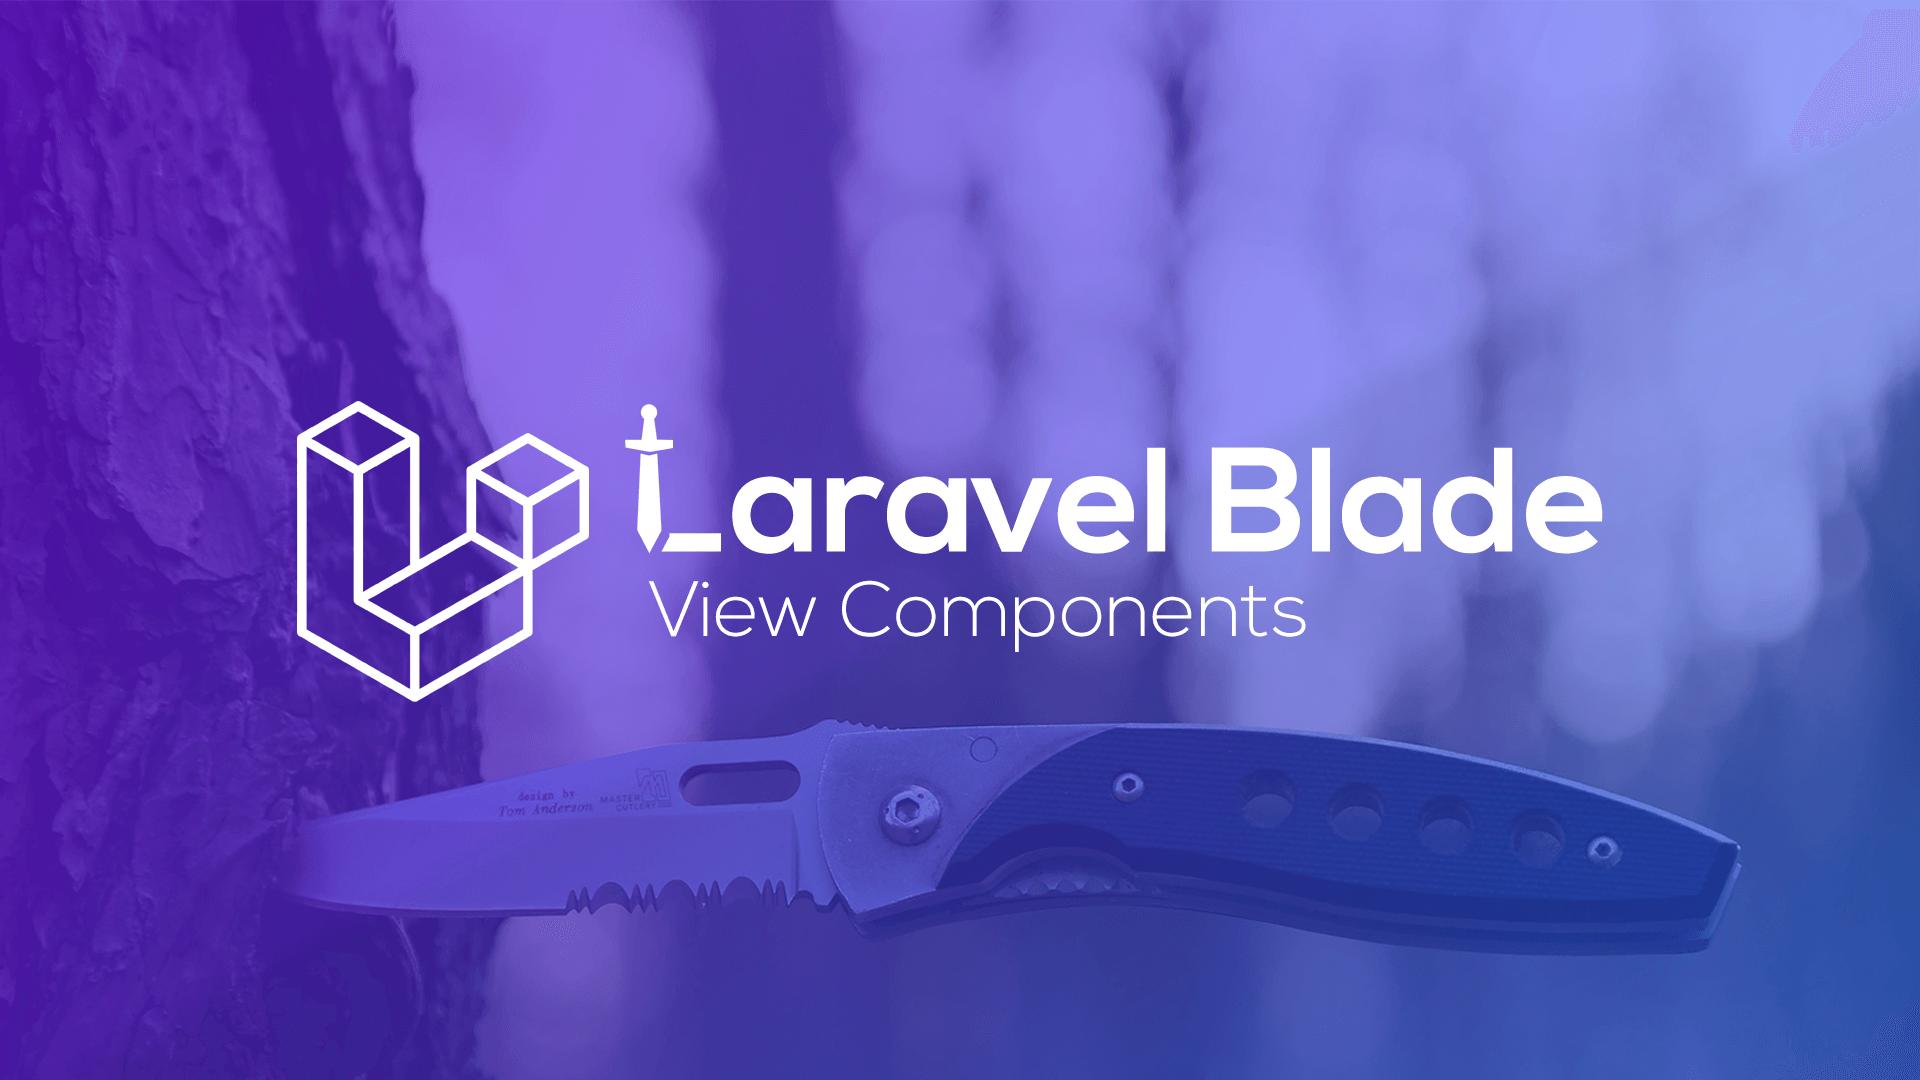 The Benefits of Blade View Components